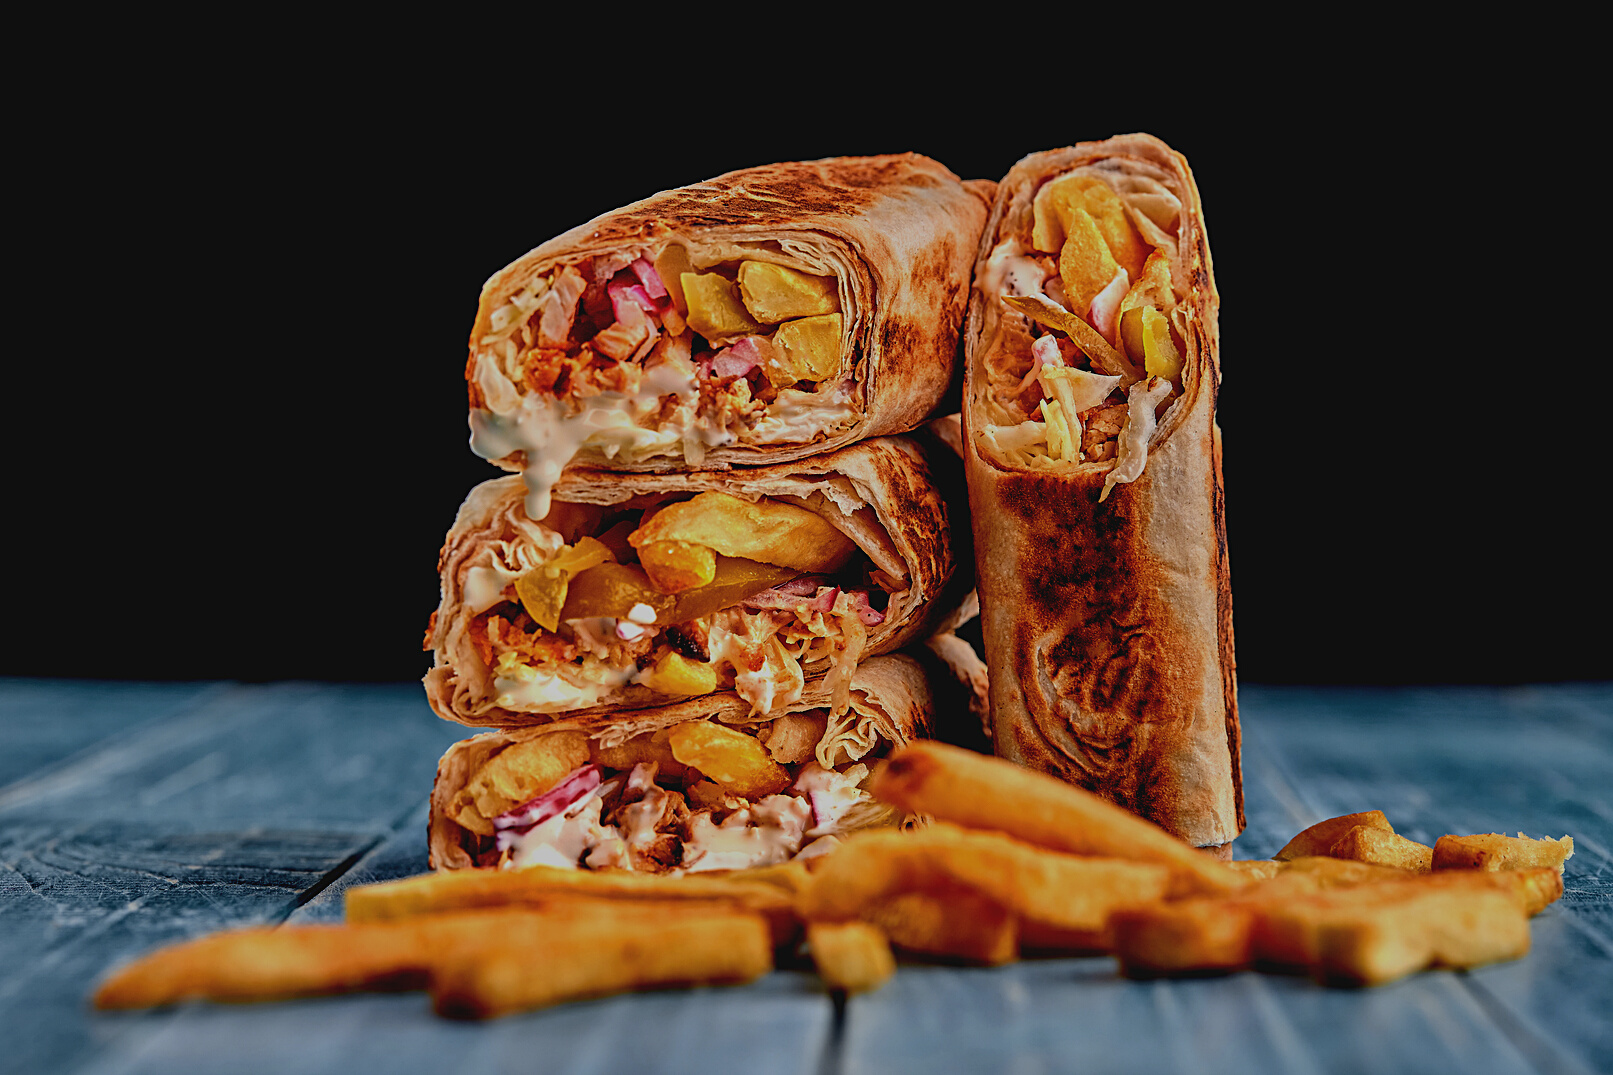 Shawarma Chicken Roll in a Pita with Fresh Vegetables, Cream Sauce and French Fries on Wooden Background. Selective Focus